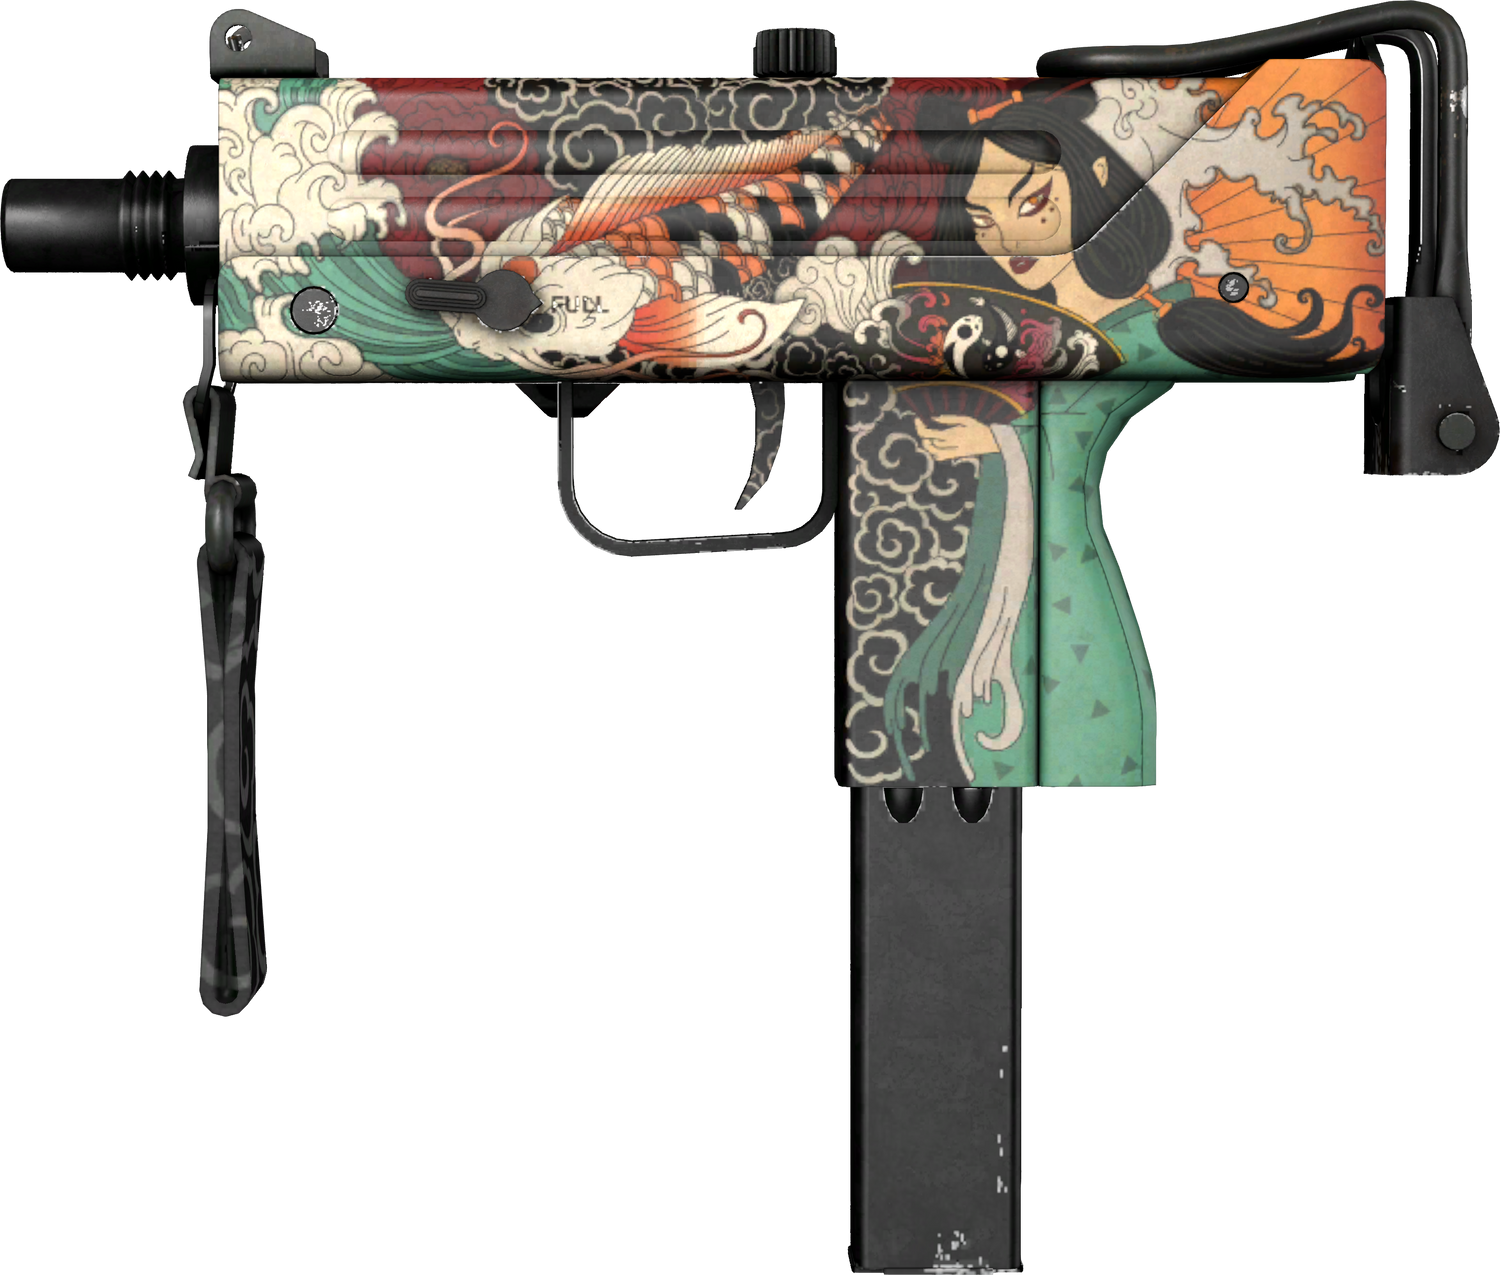 instal the new version for ipod MAC-10 Button Masher cs go skin